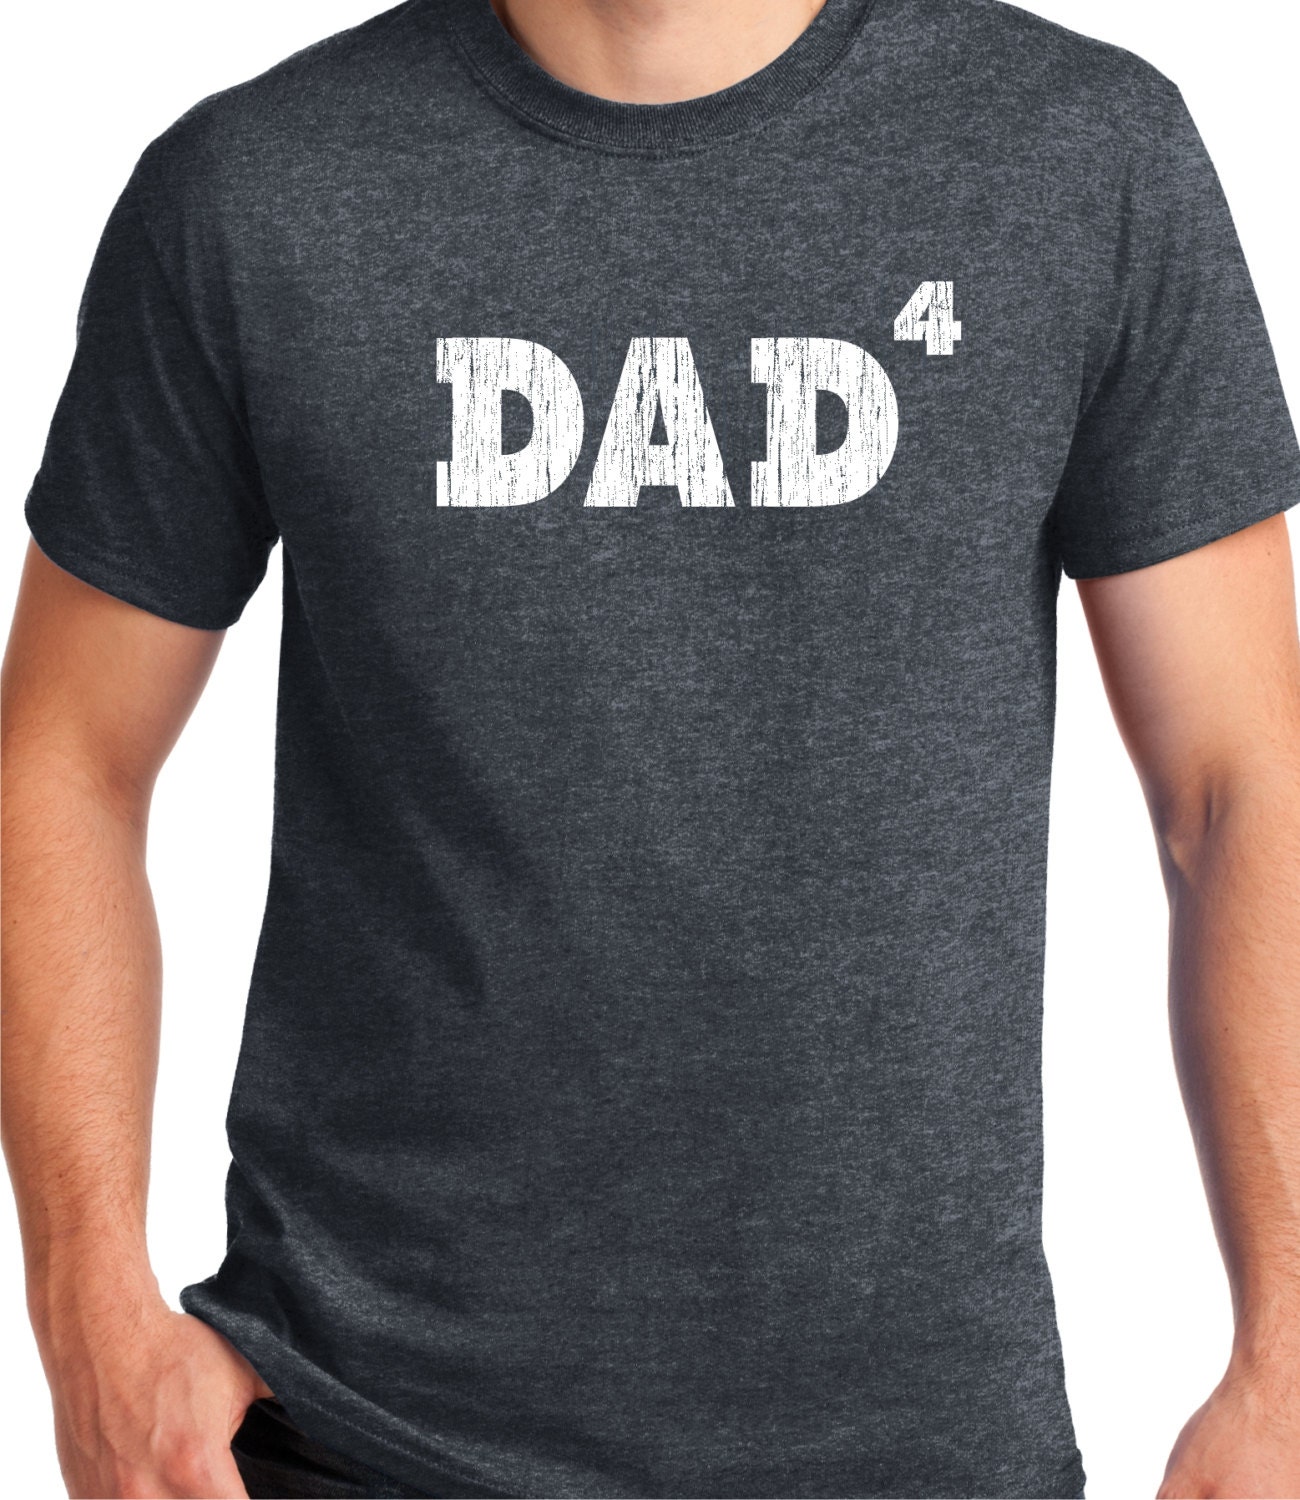 DAD 4 Fathers Day gift-t shirt 4 Kids-T shirt for Dad Funny